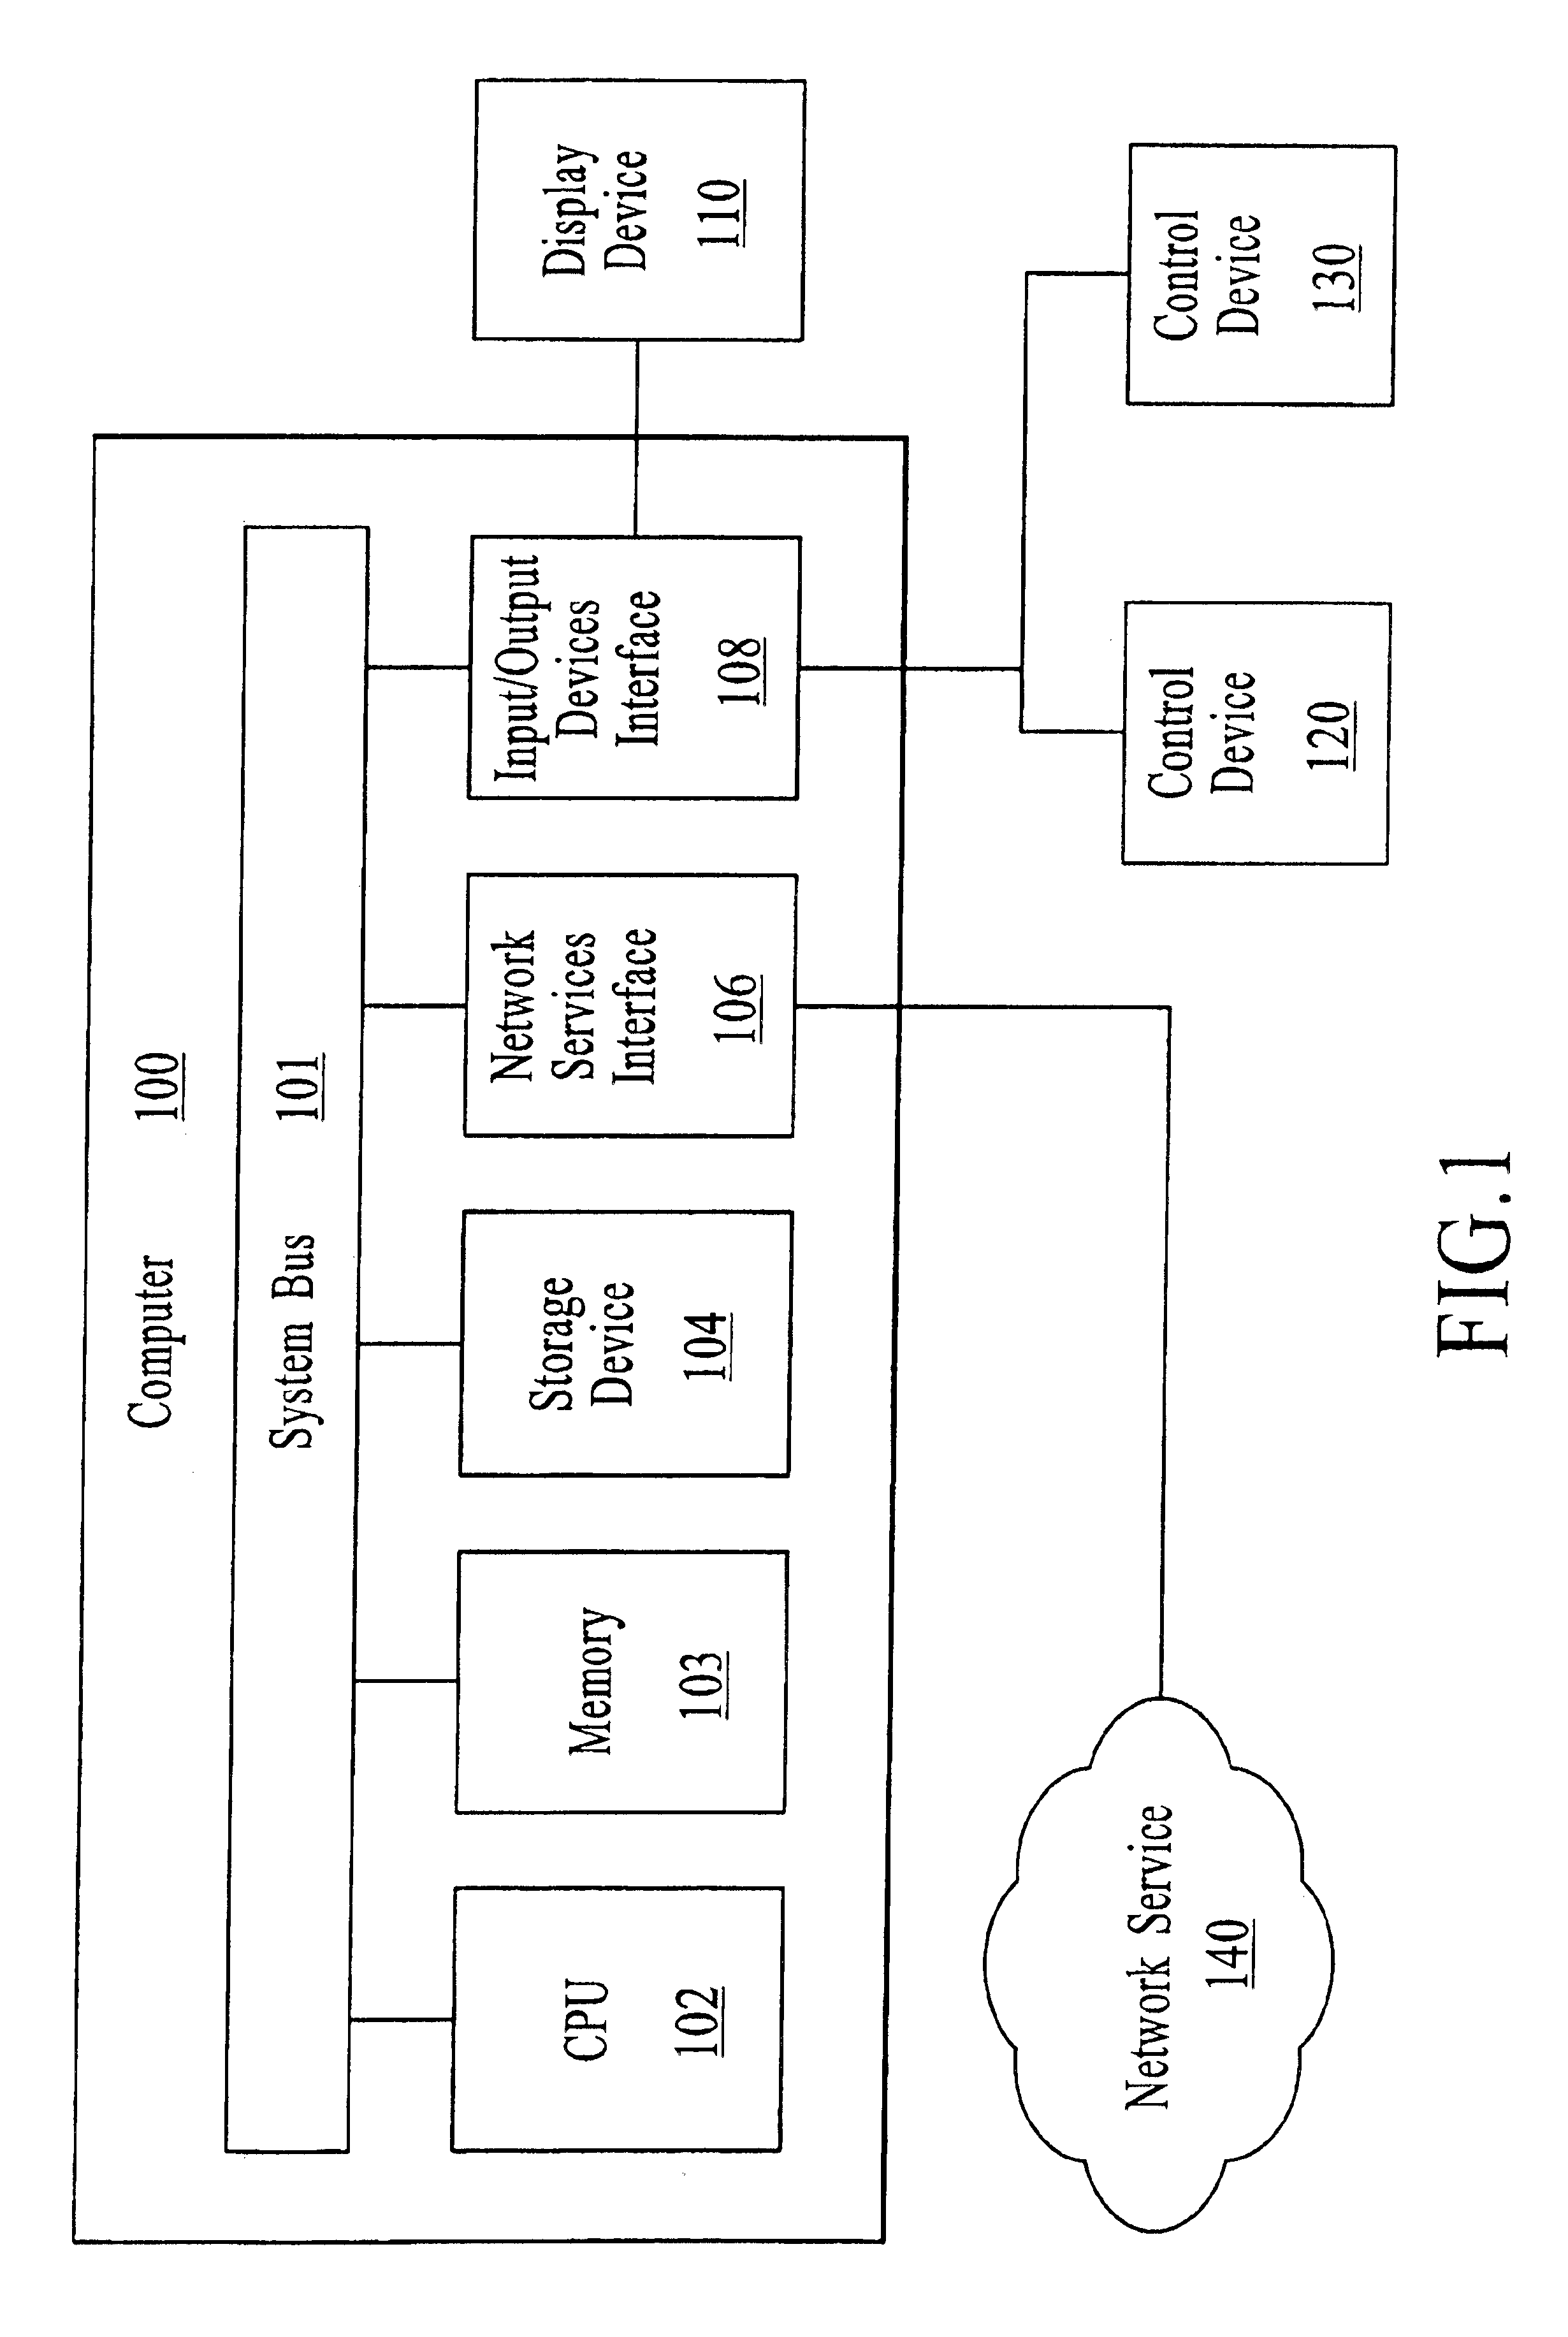 Notification mechanisms on a control device